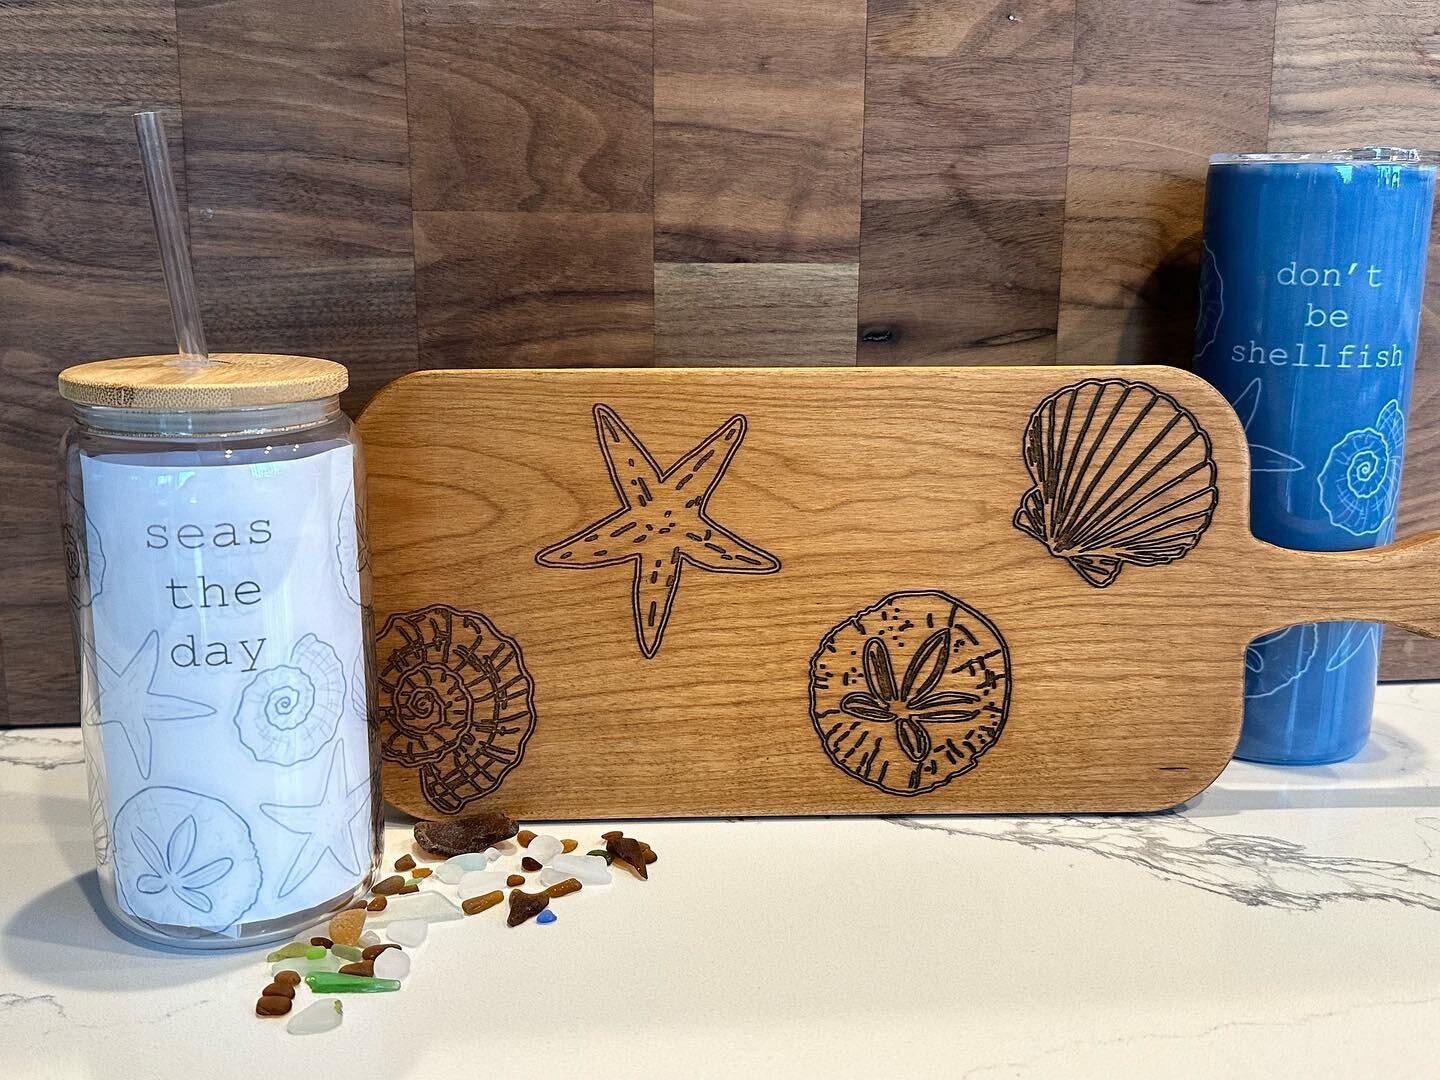 Summertime and seashells! Check out our new seashell collection which includes our new 20oz tumblers. These punny options are the perfect way to kick off the summer! www.blockhousemarket.com #blockhousemarket #smallbusiness #localbusiness #whidbey #s